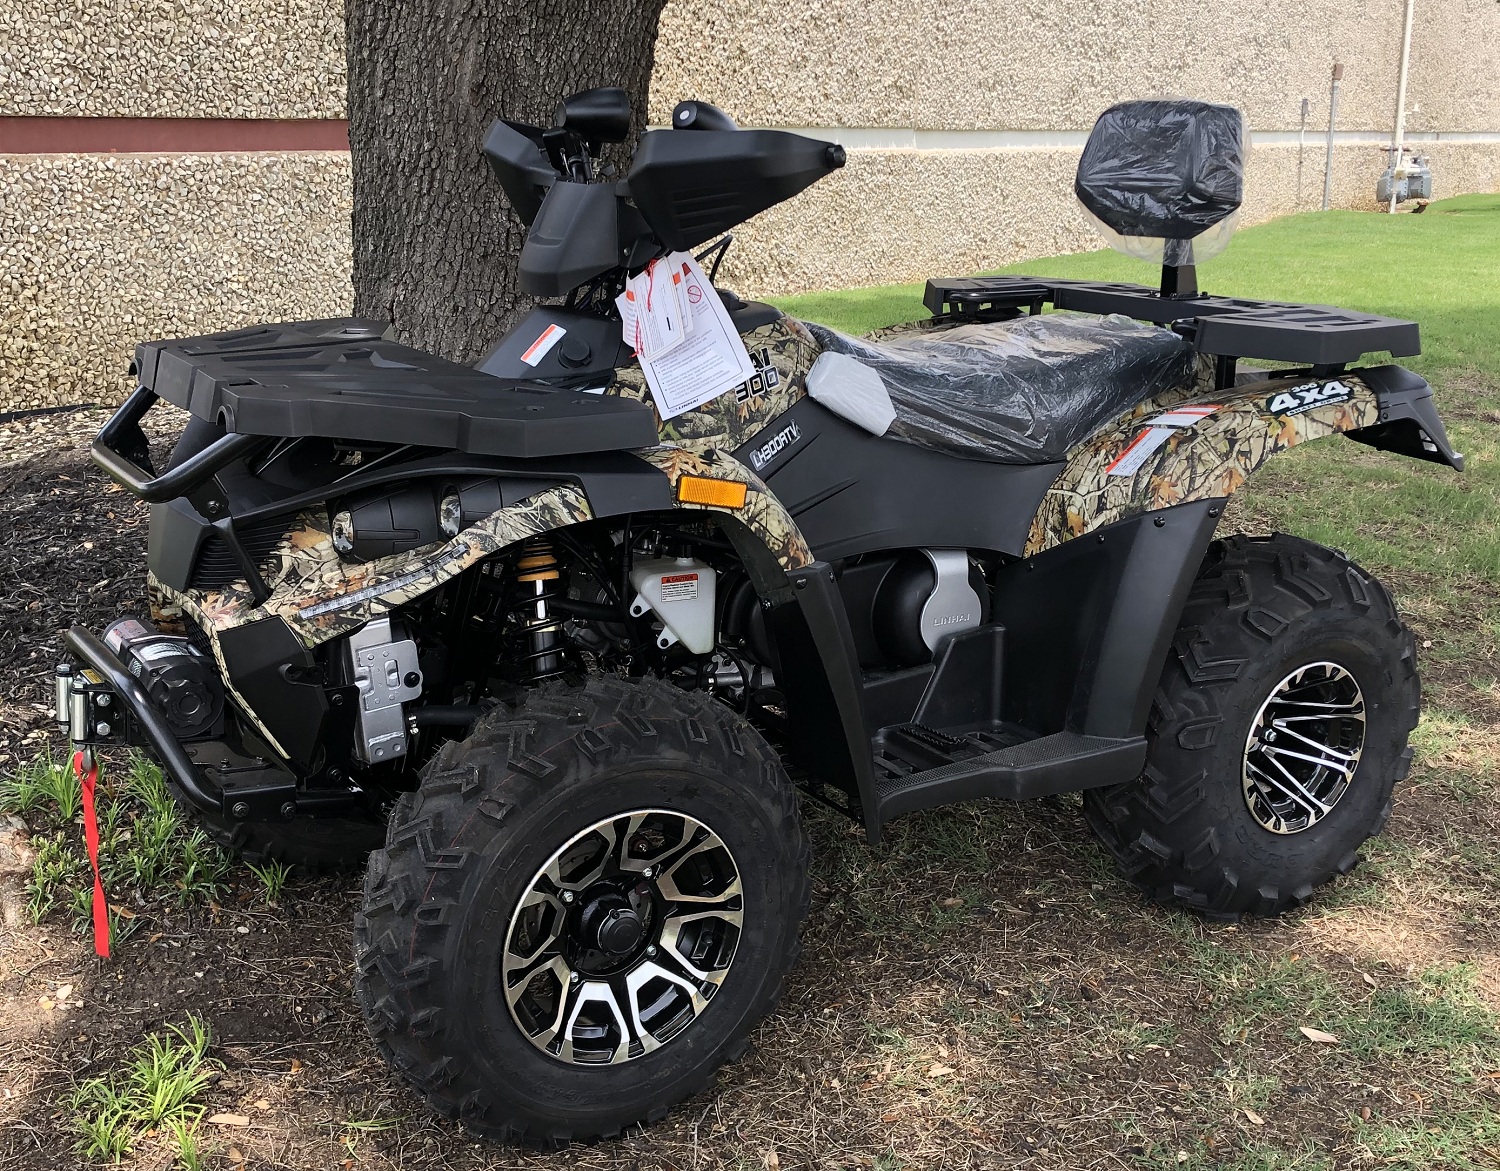 New RPS 300Cc Adult ATV with Winch, Backrest, & Bluetooth Speakers